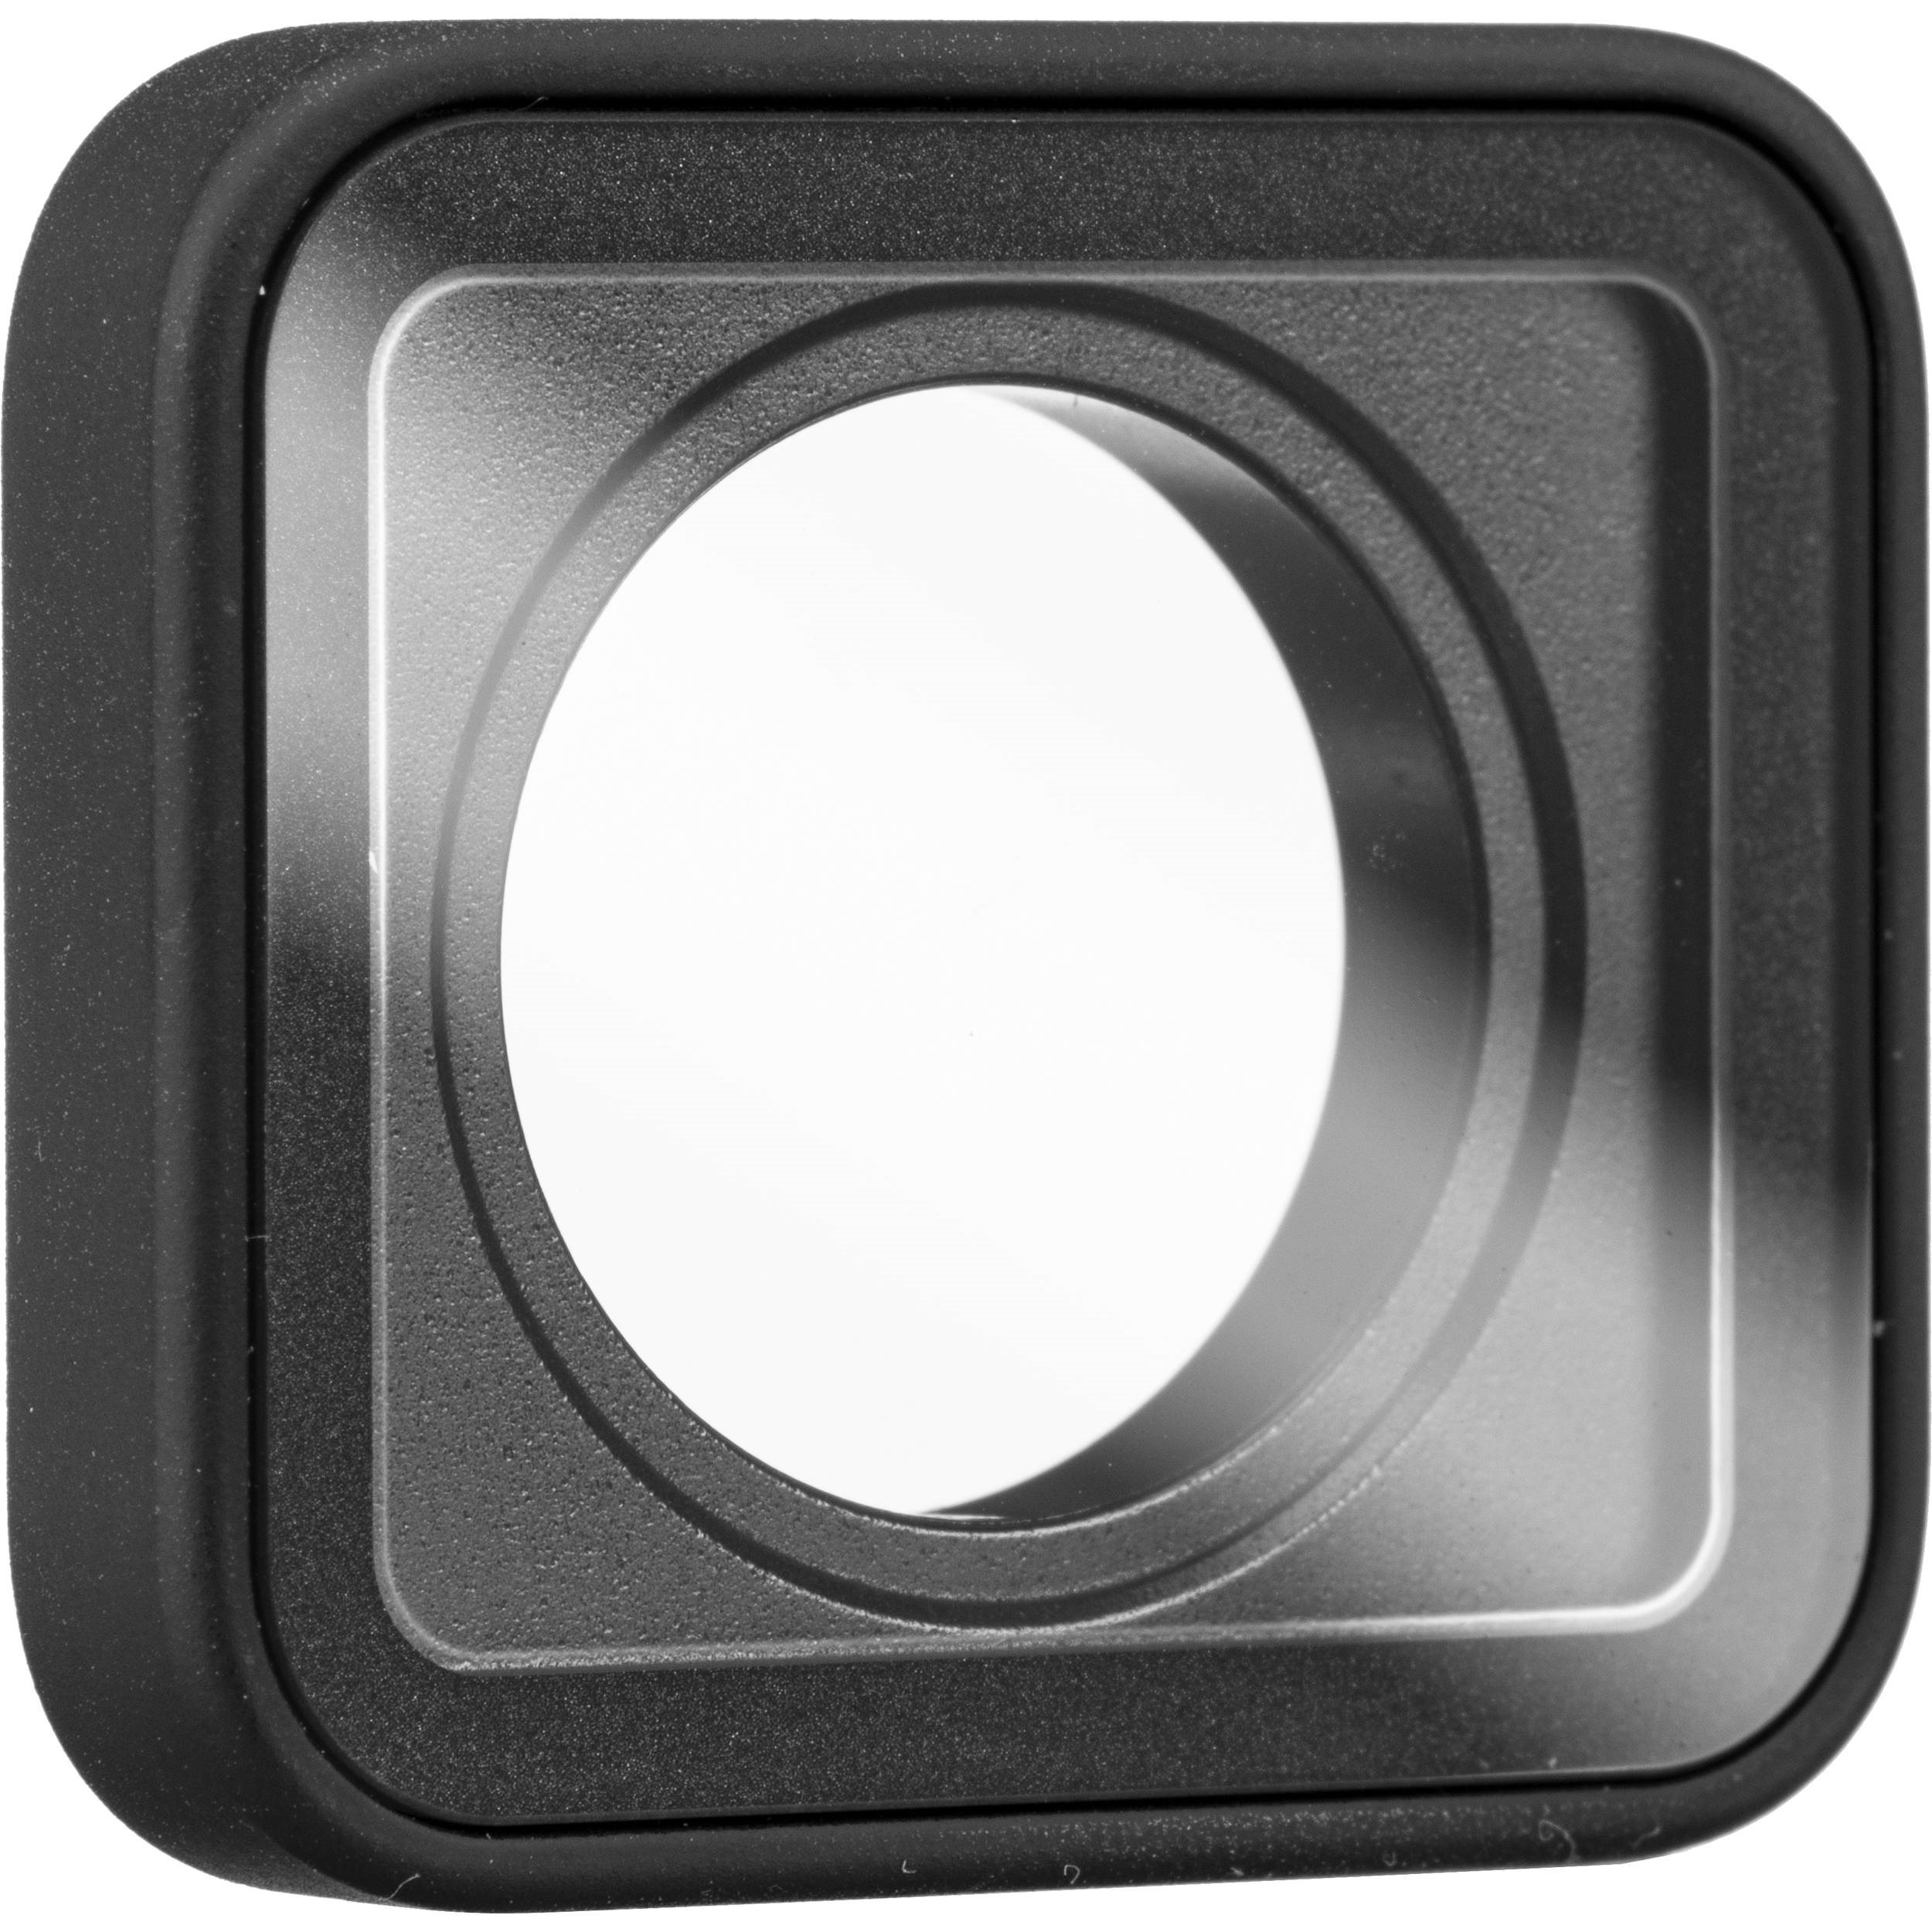 GoPro Protective Lens Replacement for HERO7 (Black)